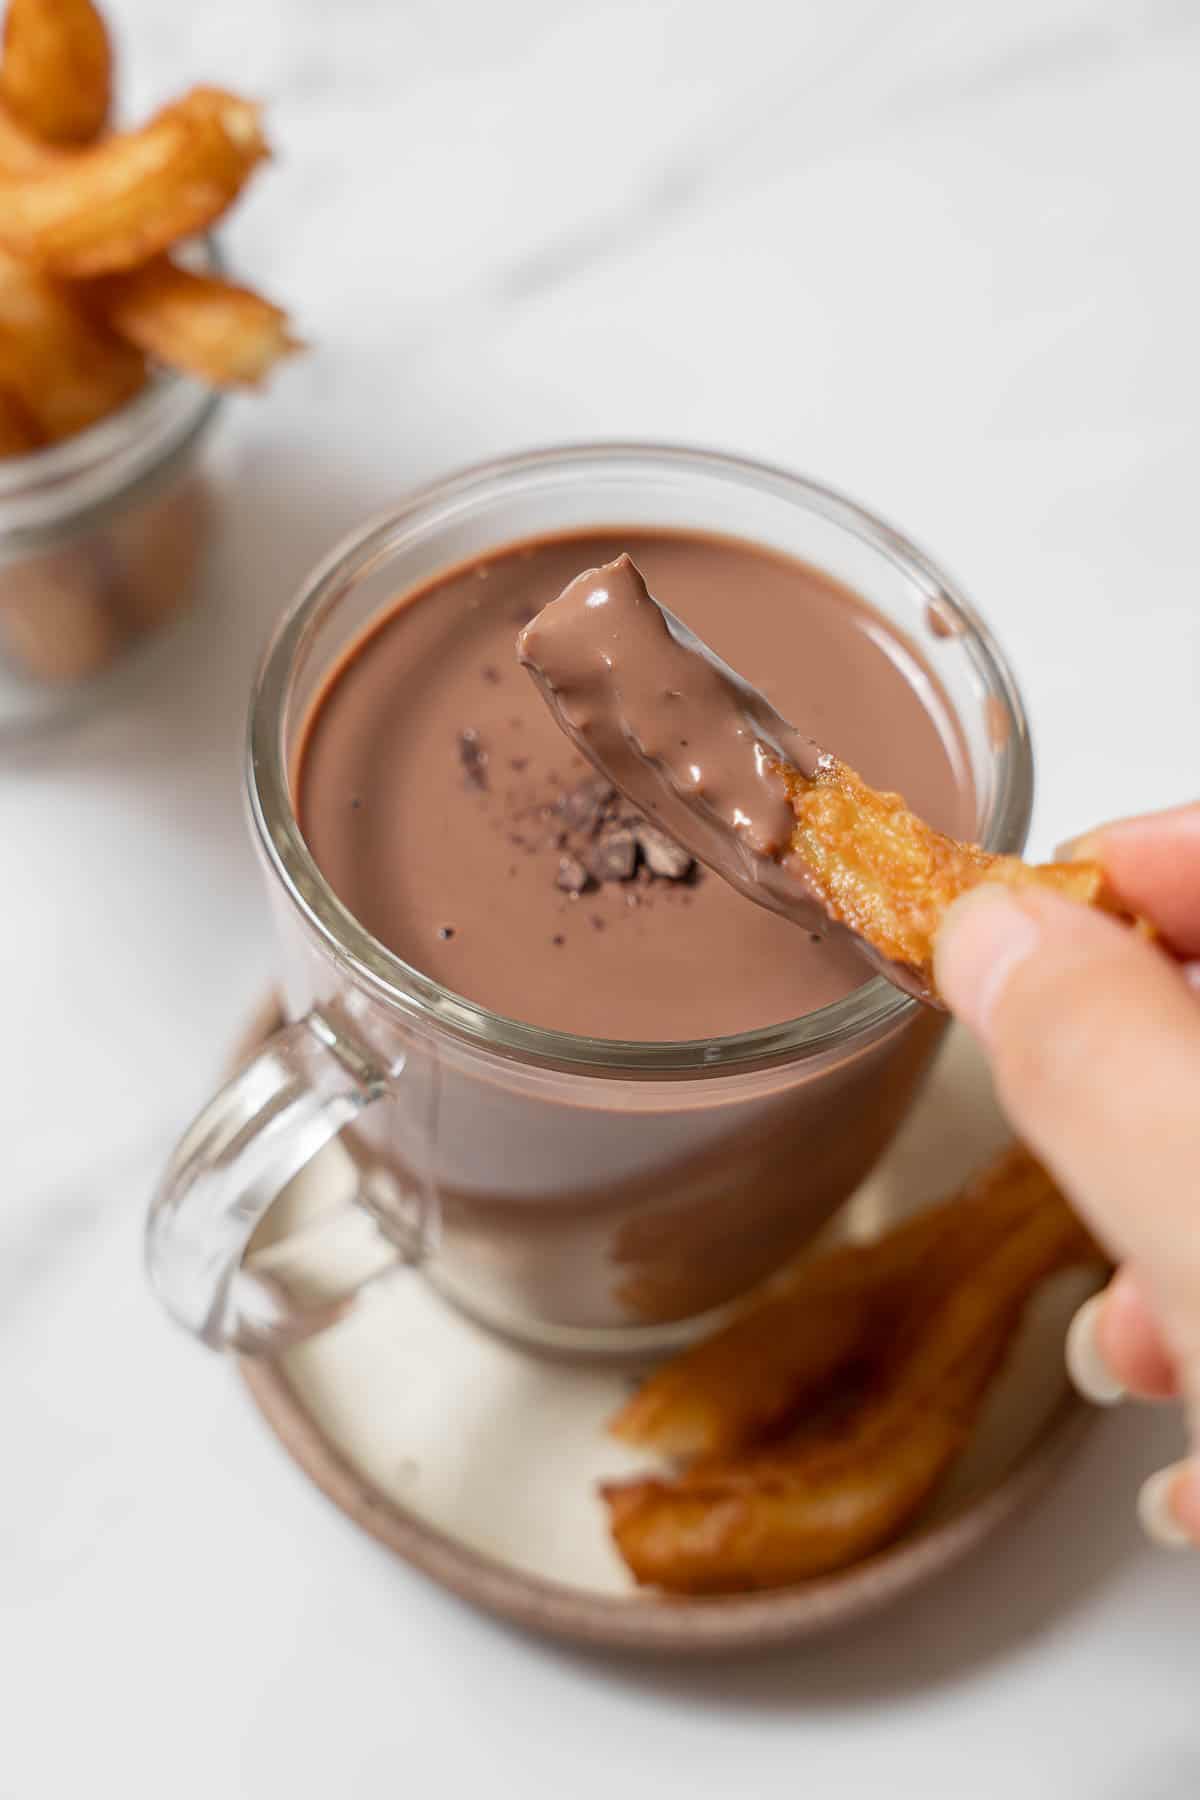 dipping a churro into a cup of Spanish hot chocolate.